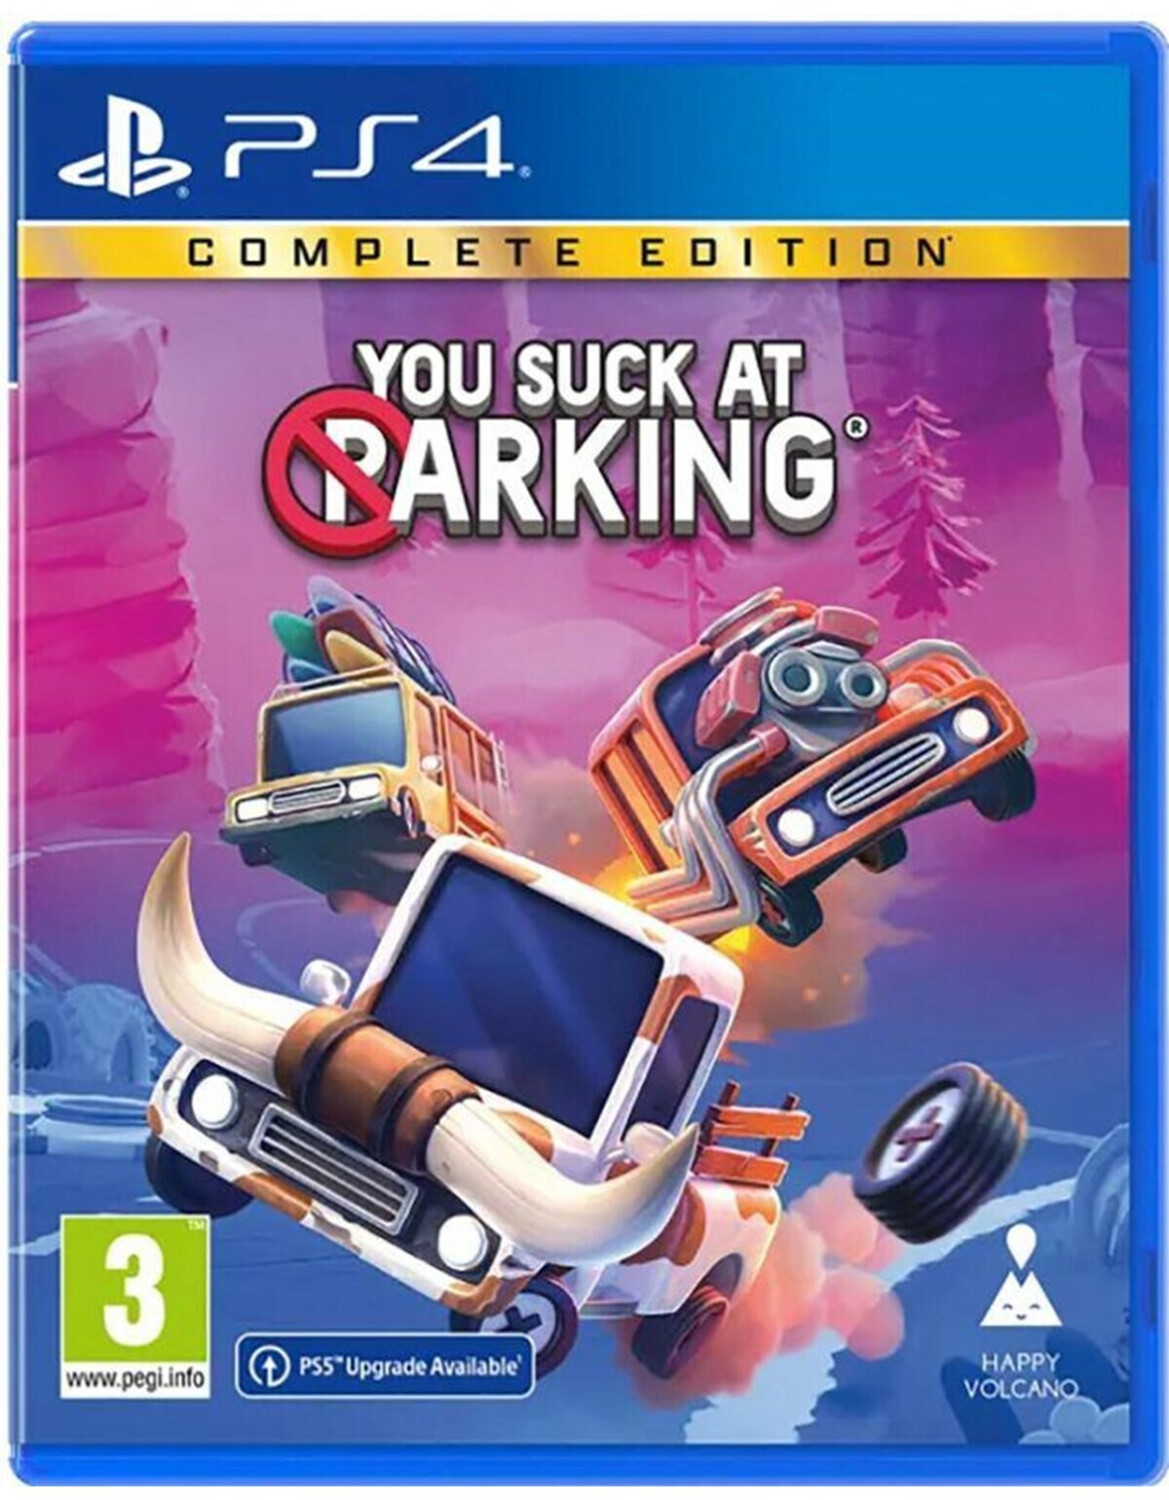 Photos - Game Fireshine  You Suck at Parking: Complete Edition (PS4)